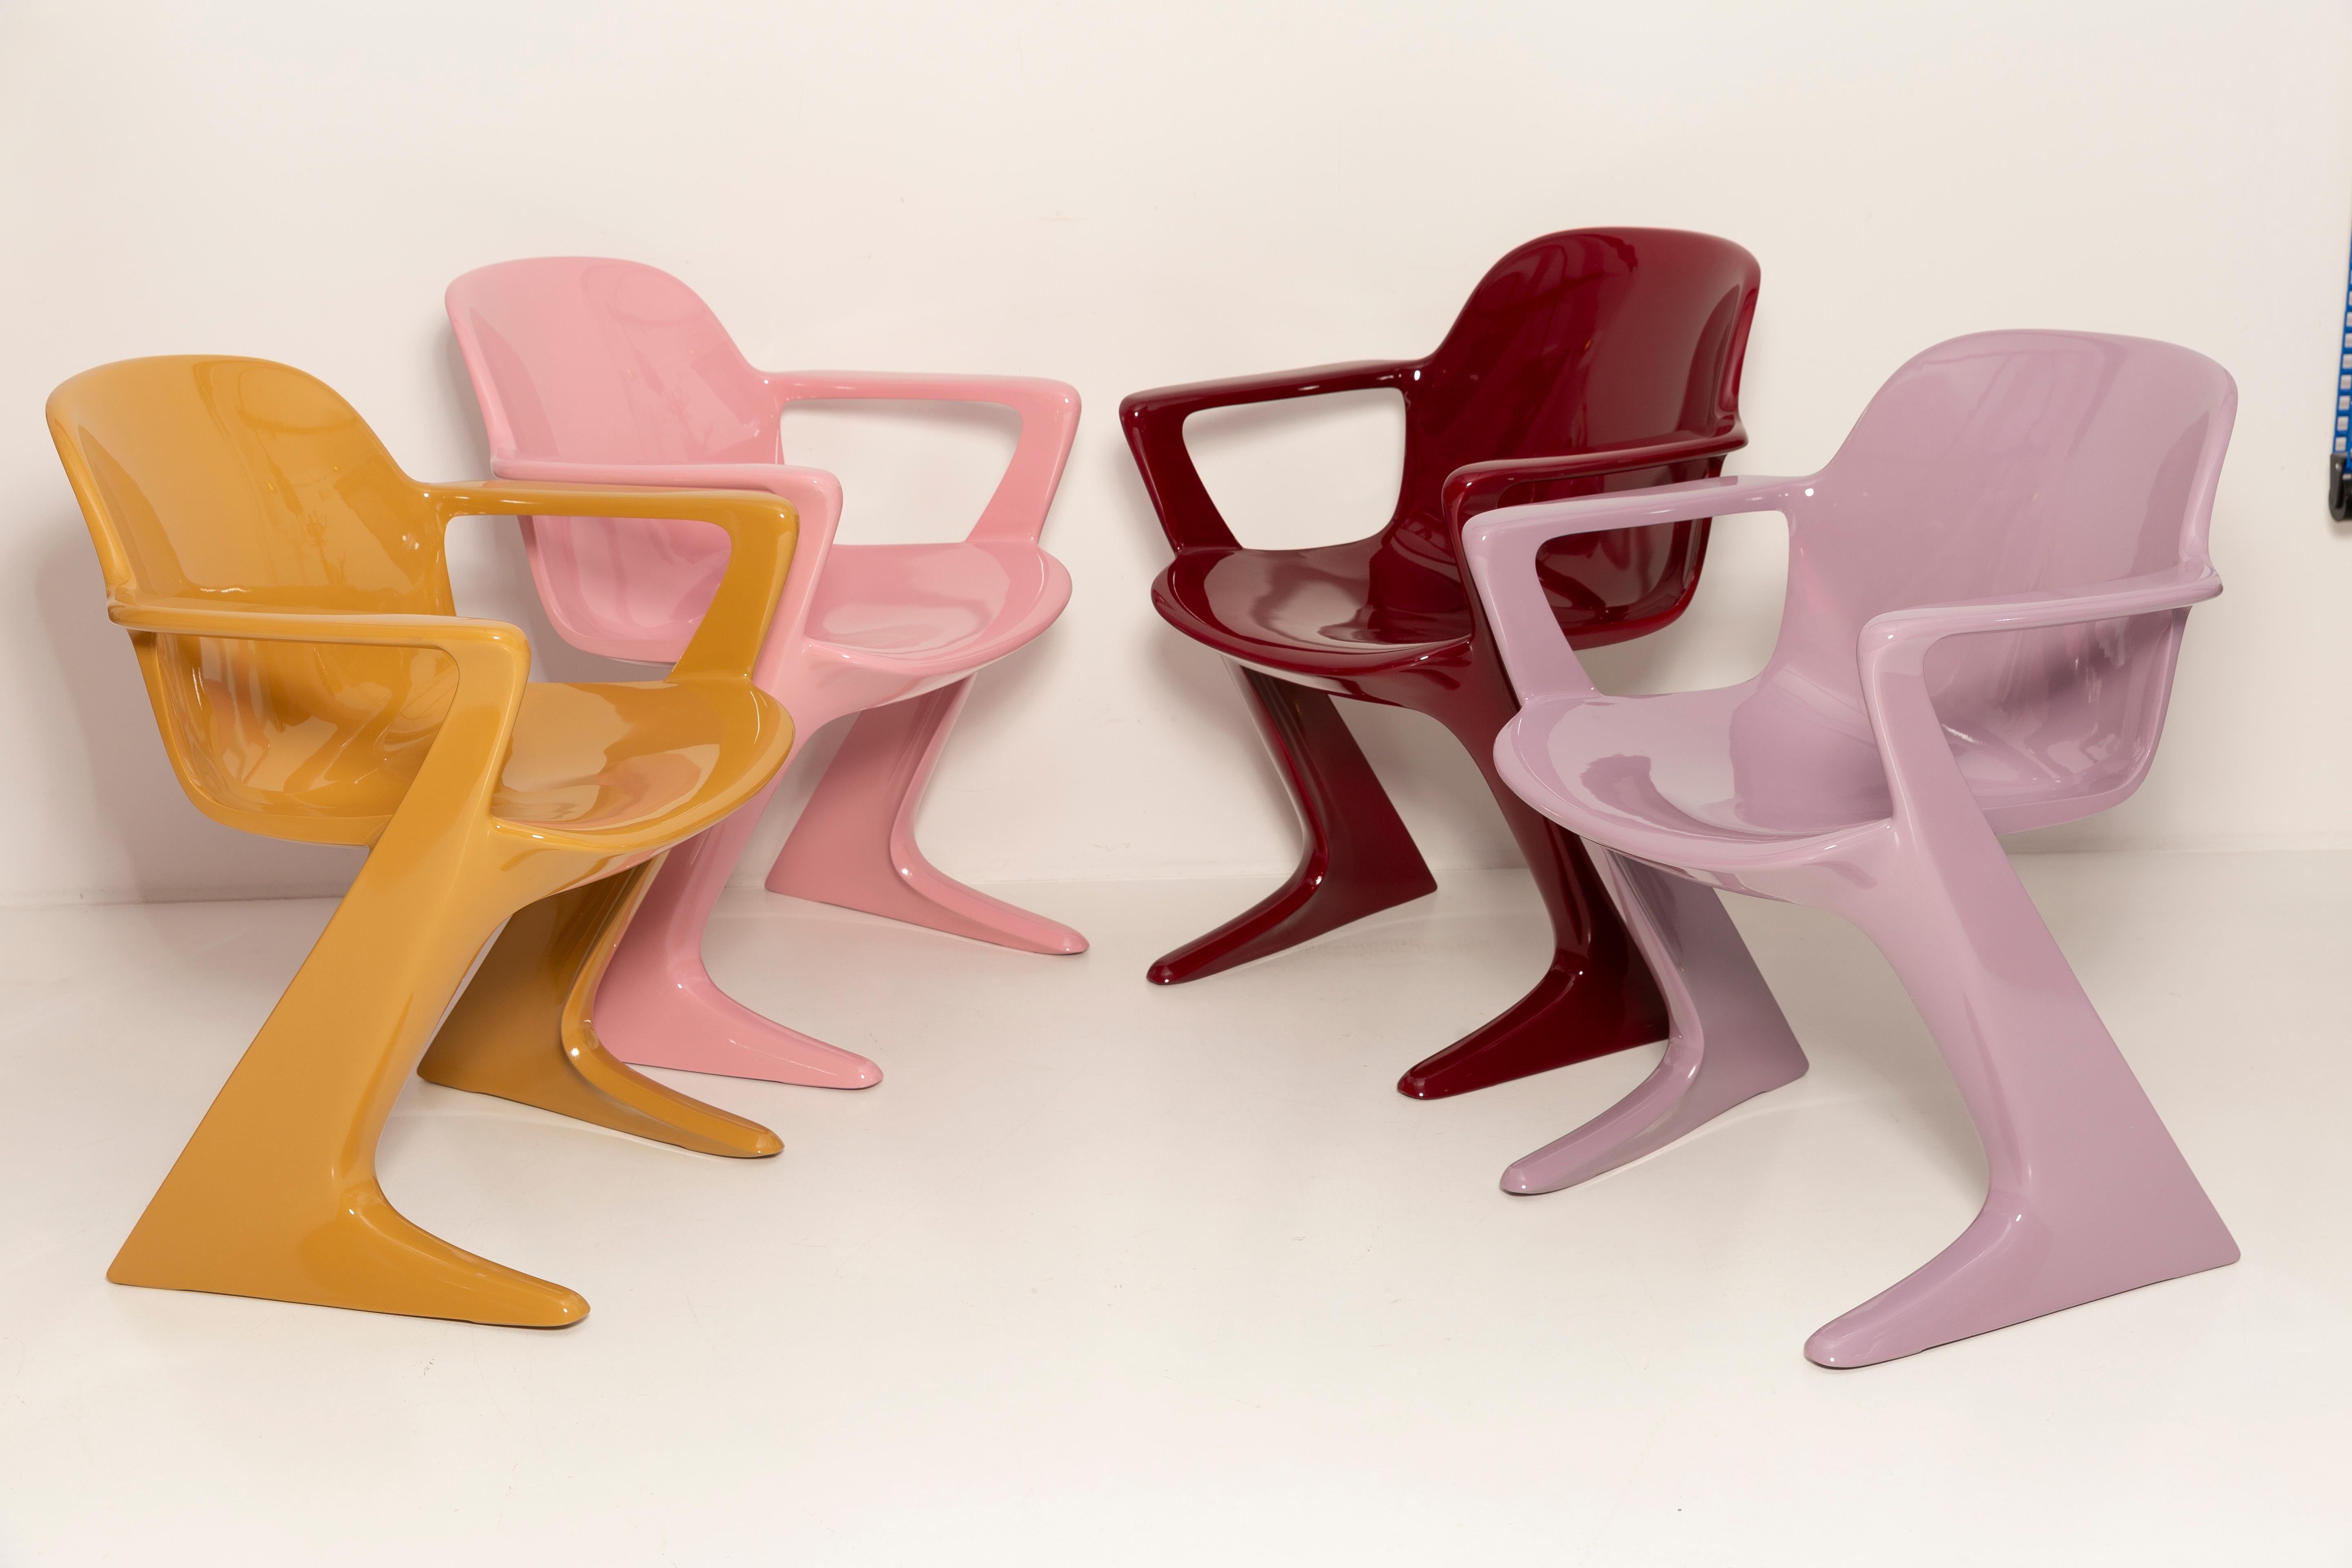 Set of Three Mid Century Kangaroo Chairs, Ernst Moeckl, Germany, 1968 In Excellent Condition For Sale In 05-080 Hornowek, PL